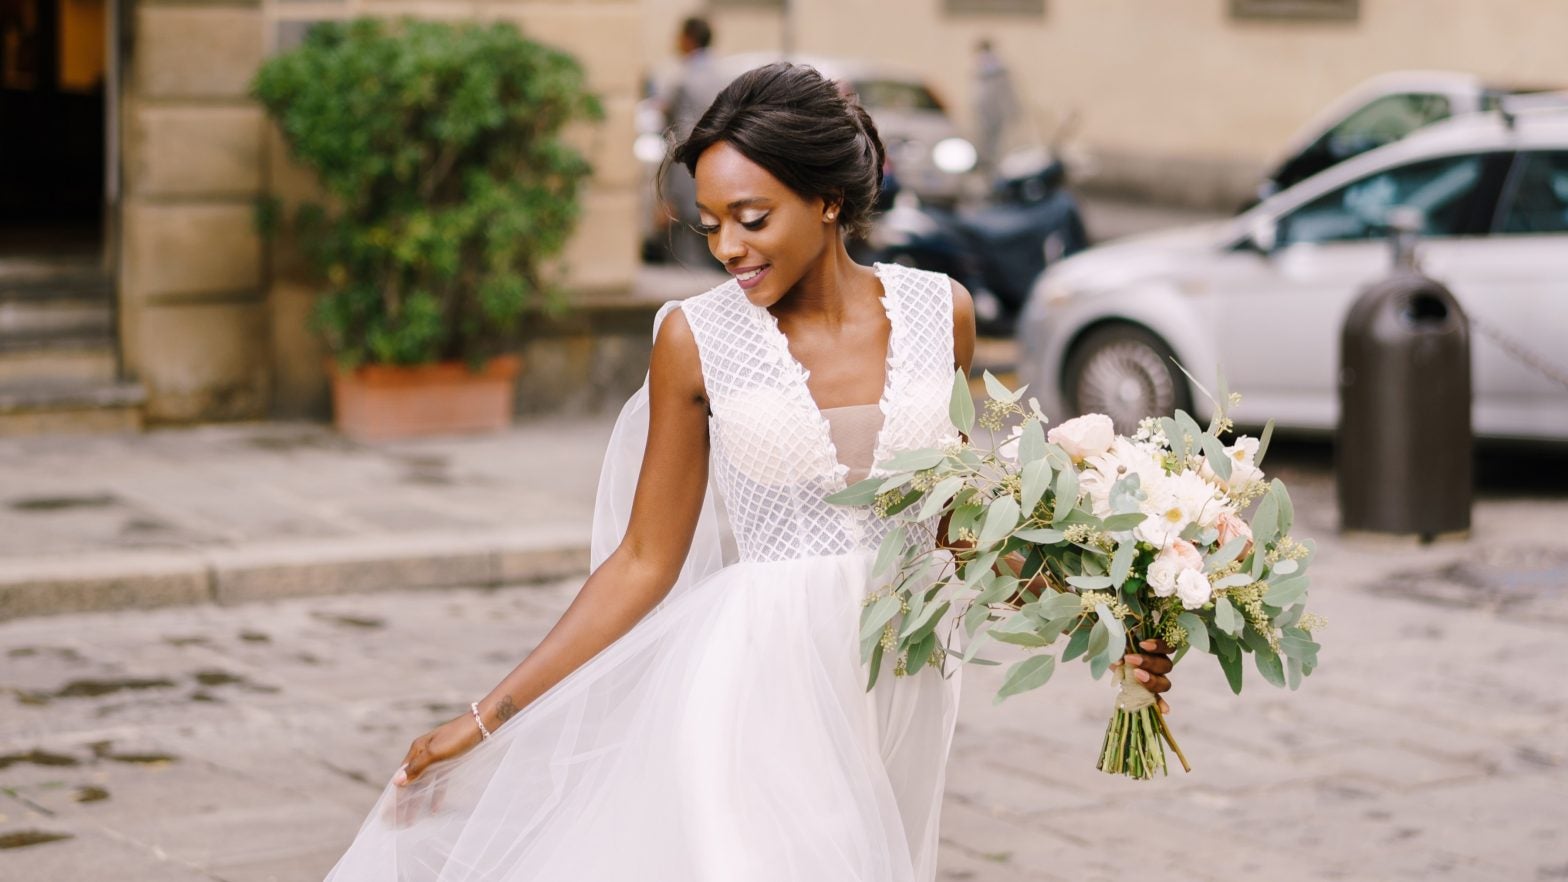 Stand Out On Your Wedding Day With These Bridal-Approved Tips From Our Favorite Beauty Experts